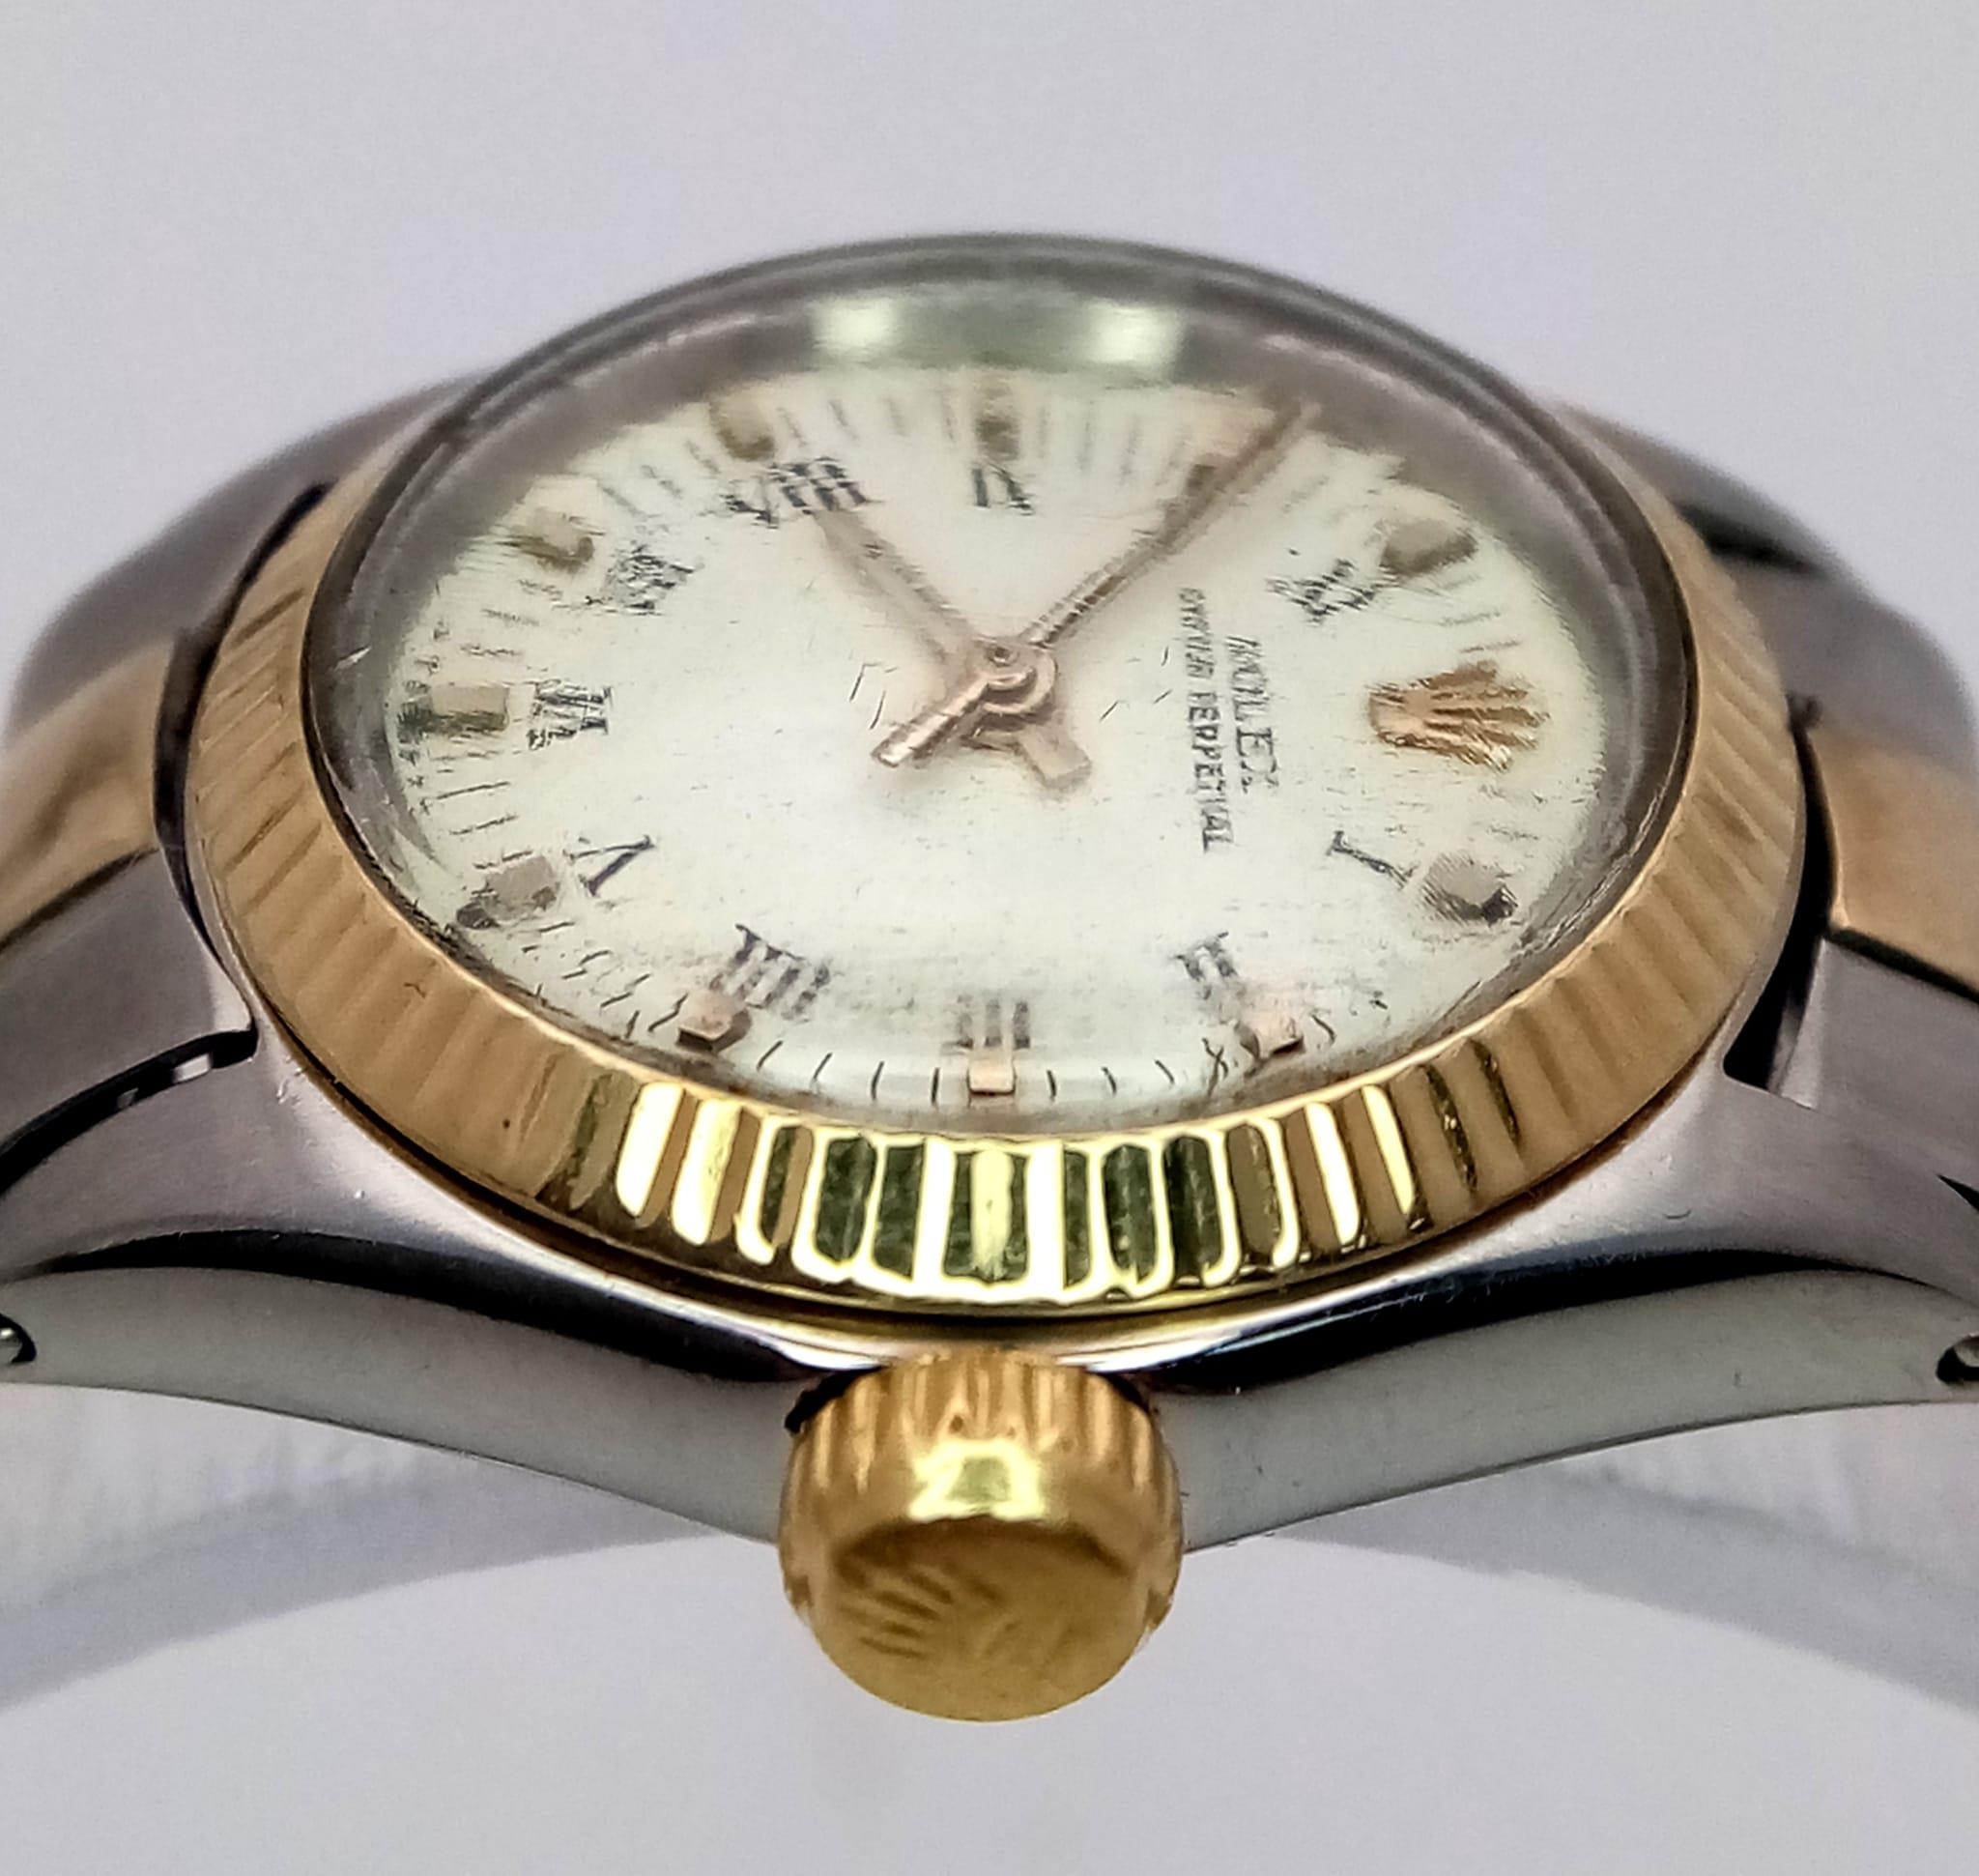 A VINTAGE LADIES ROLEX OYSTER PERPETUAL BI-METAL WRIST WATCH WITH ROMAN NUMERALS AND WHITE DIAL . - Image 4 of 7